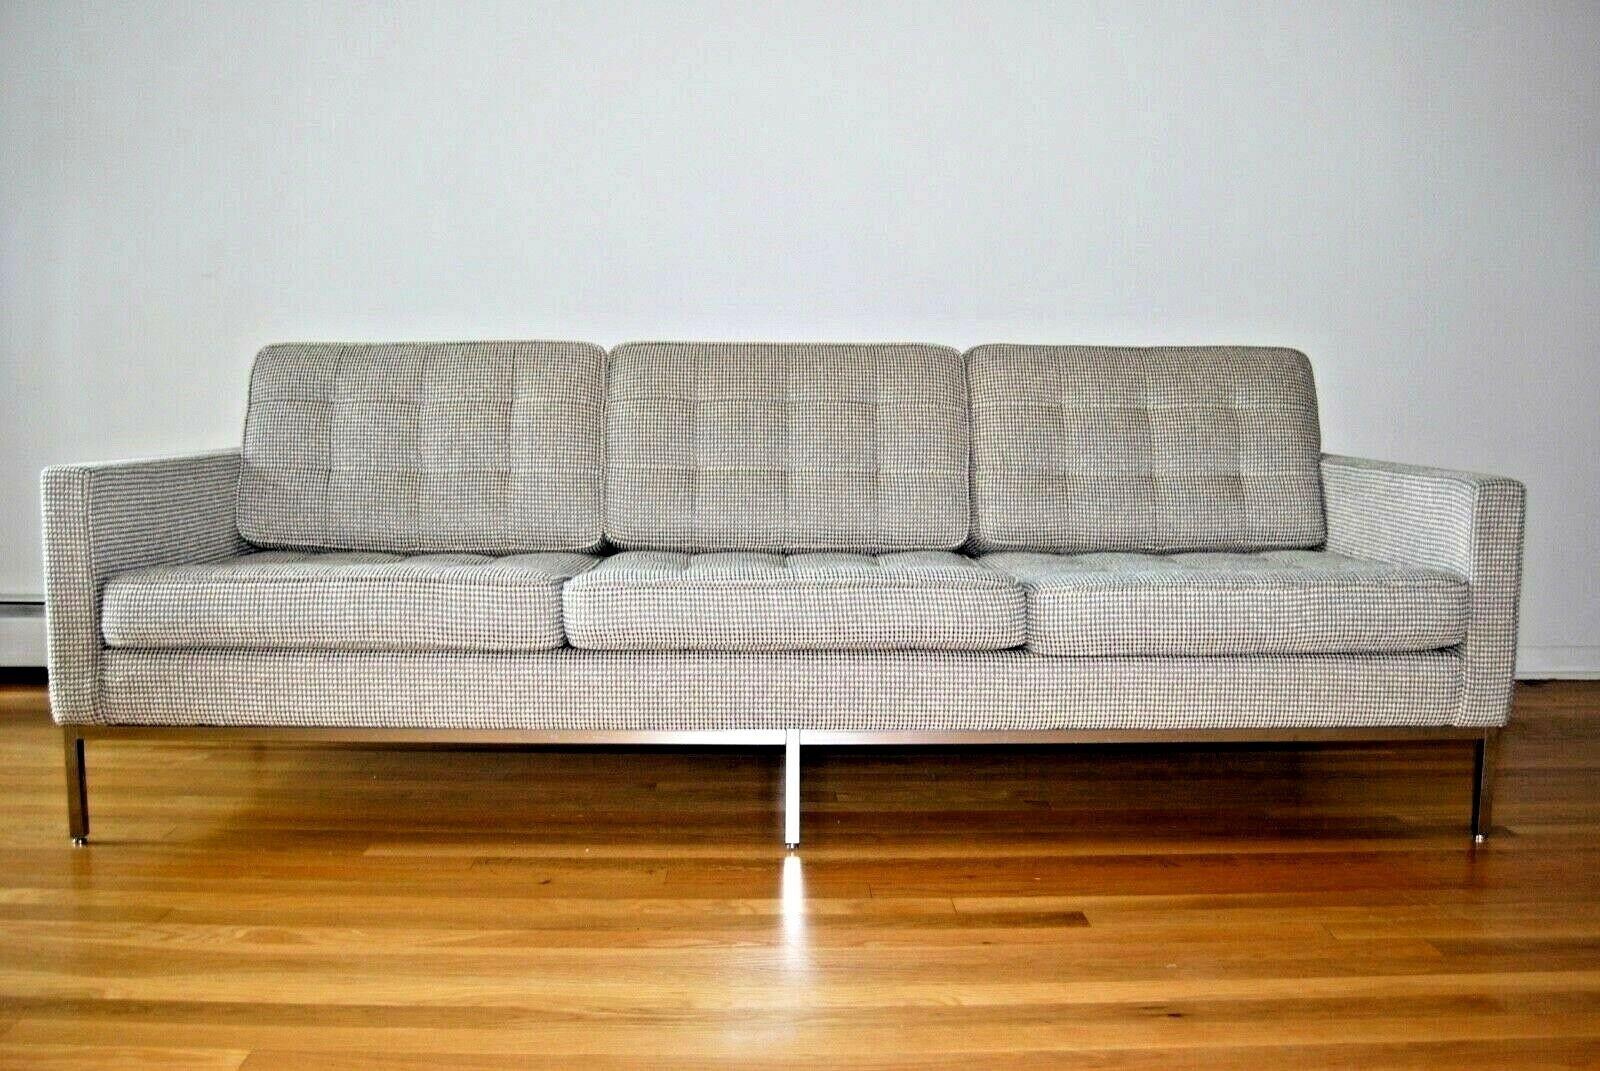 Pristine Florence Knoll Sofa for Knoll International. Upholstered in gorgeous Sina Pearson fabric.

Florence Knoll was a pioneering designer and entrepreneur who created the modern look and feel of America’s postwar corporate office with sleek